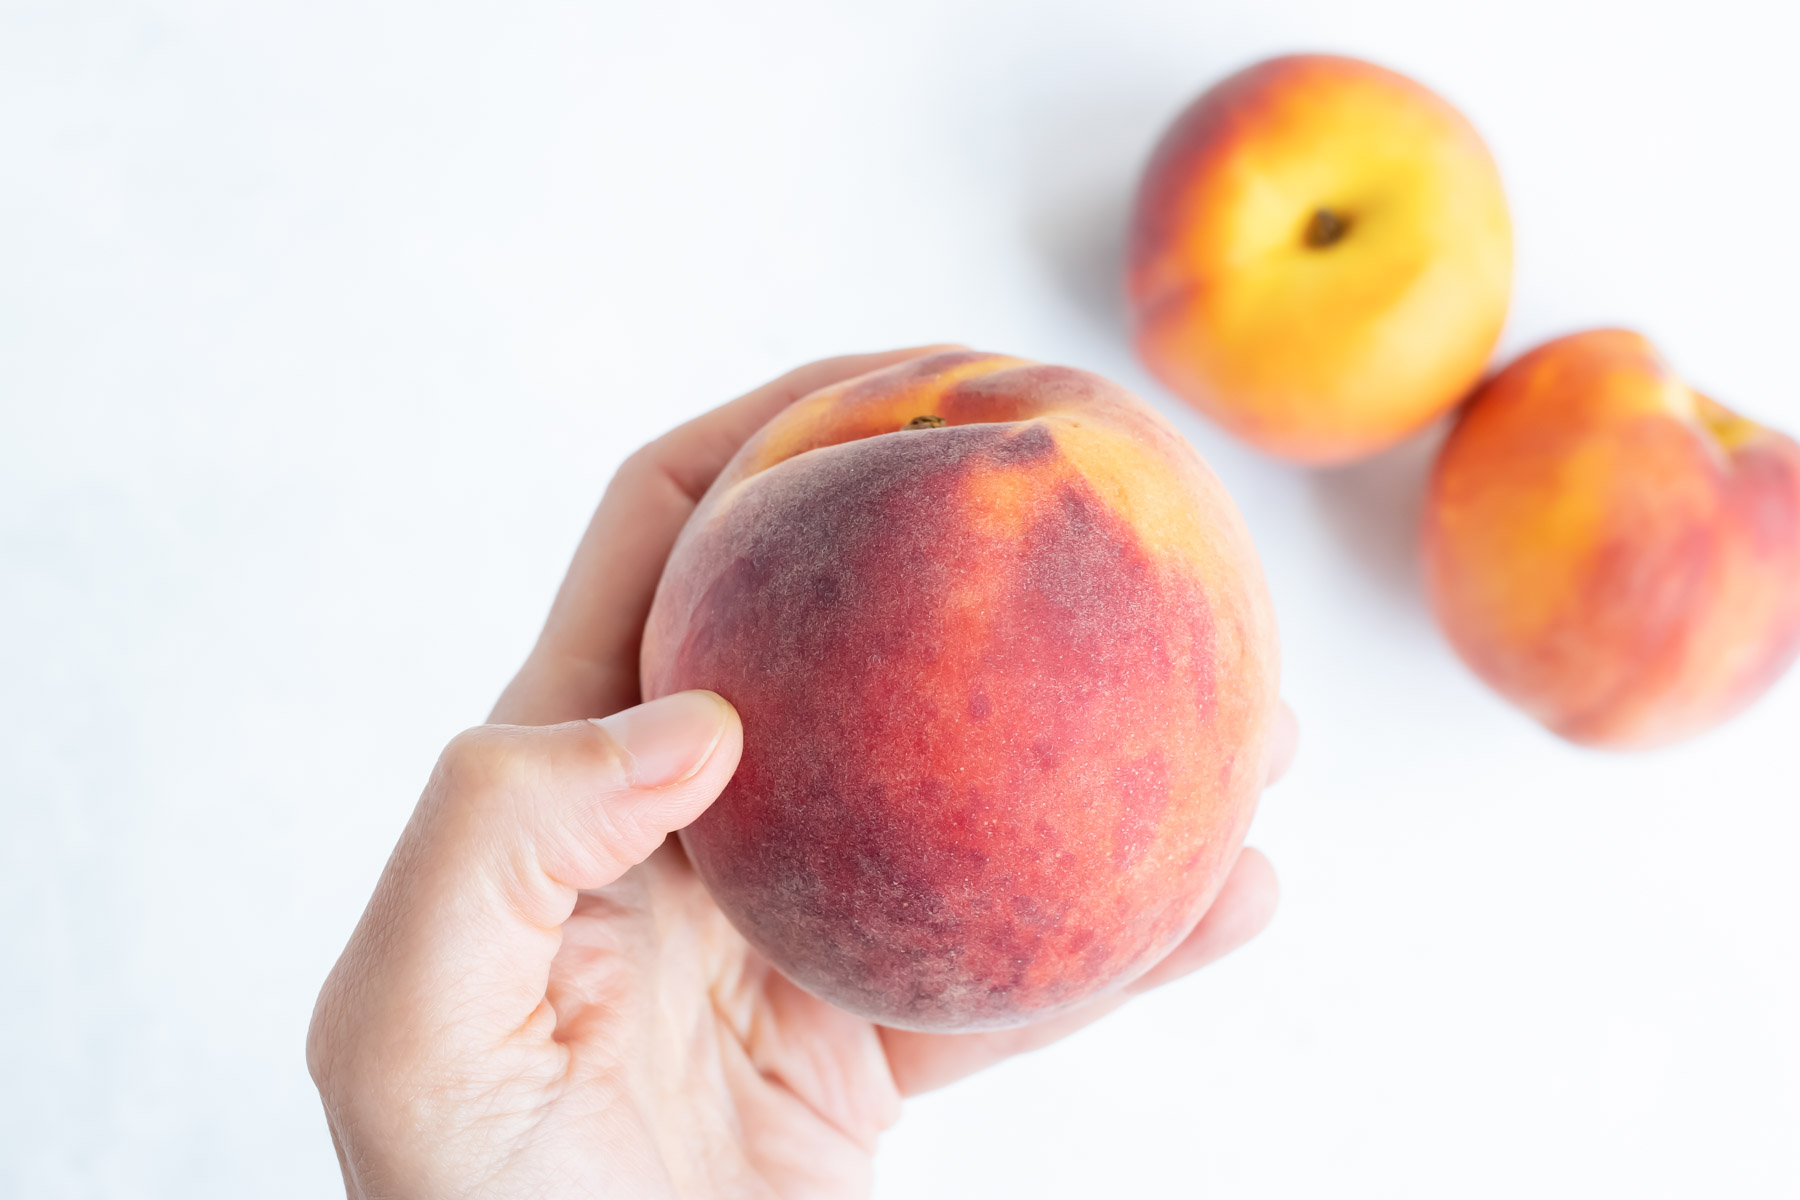 Gently press on a peach to see if it's ripe.